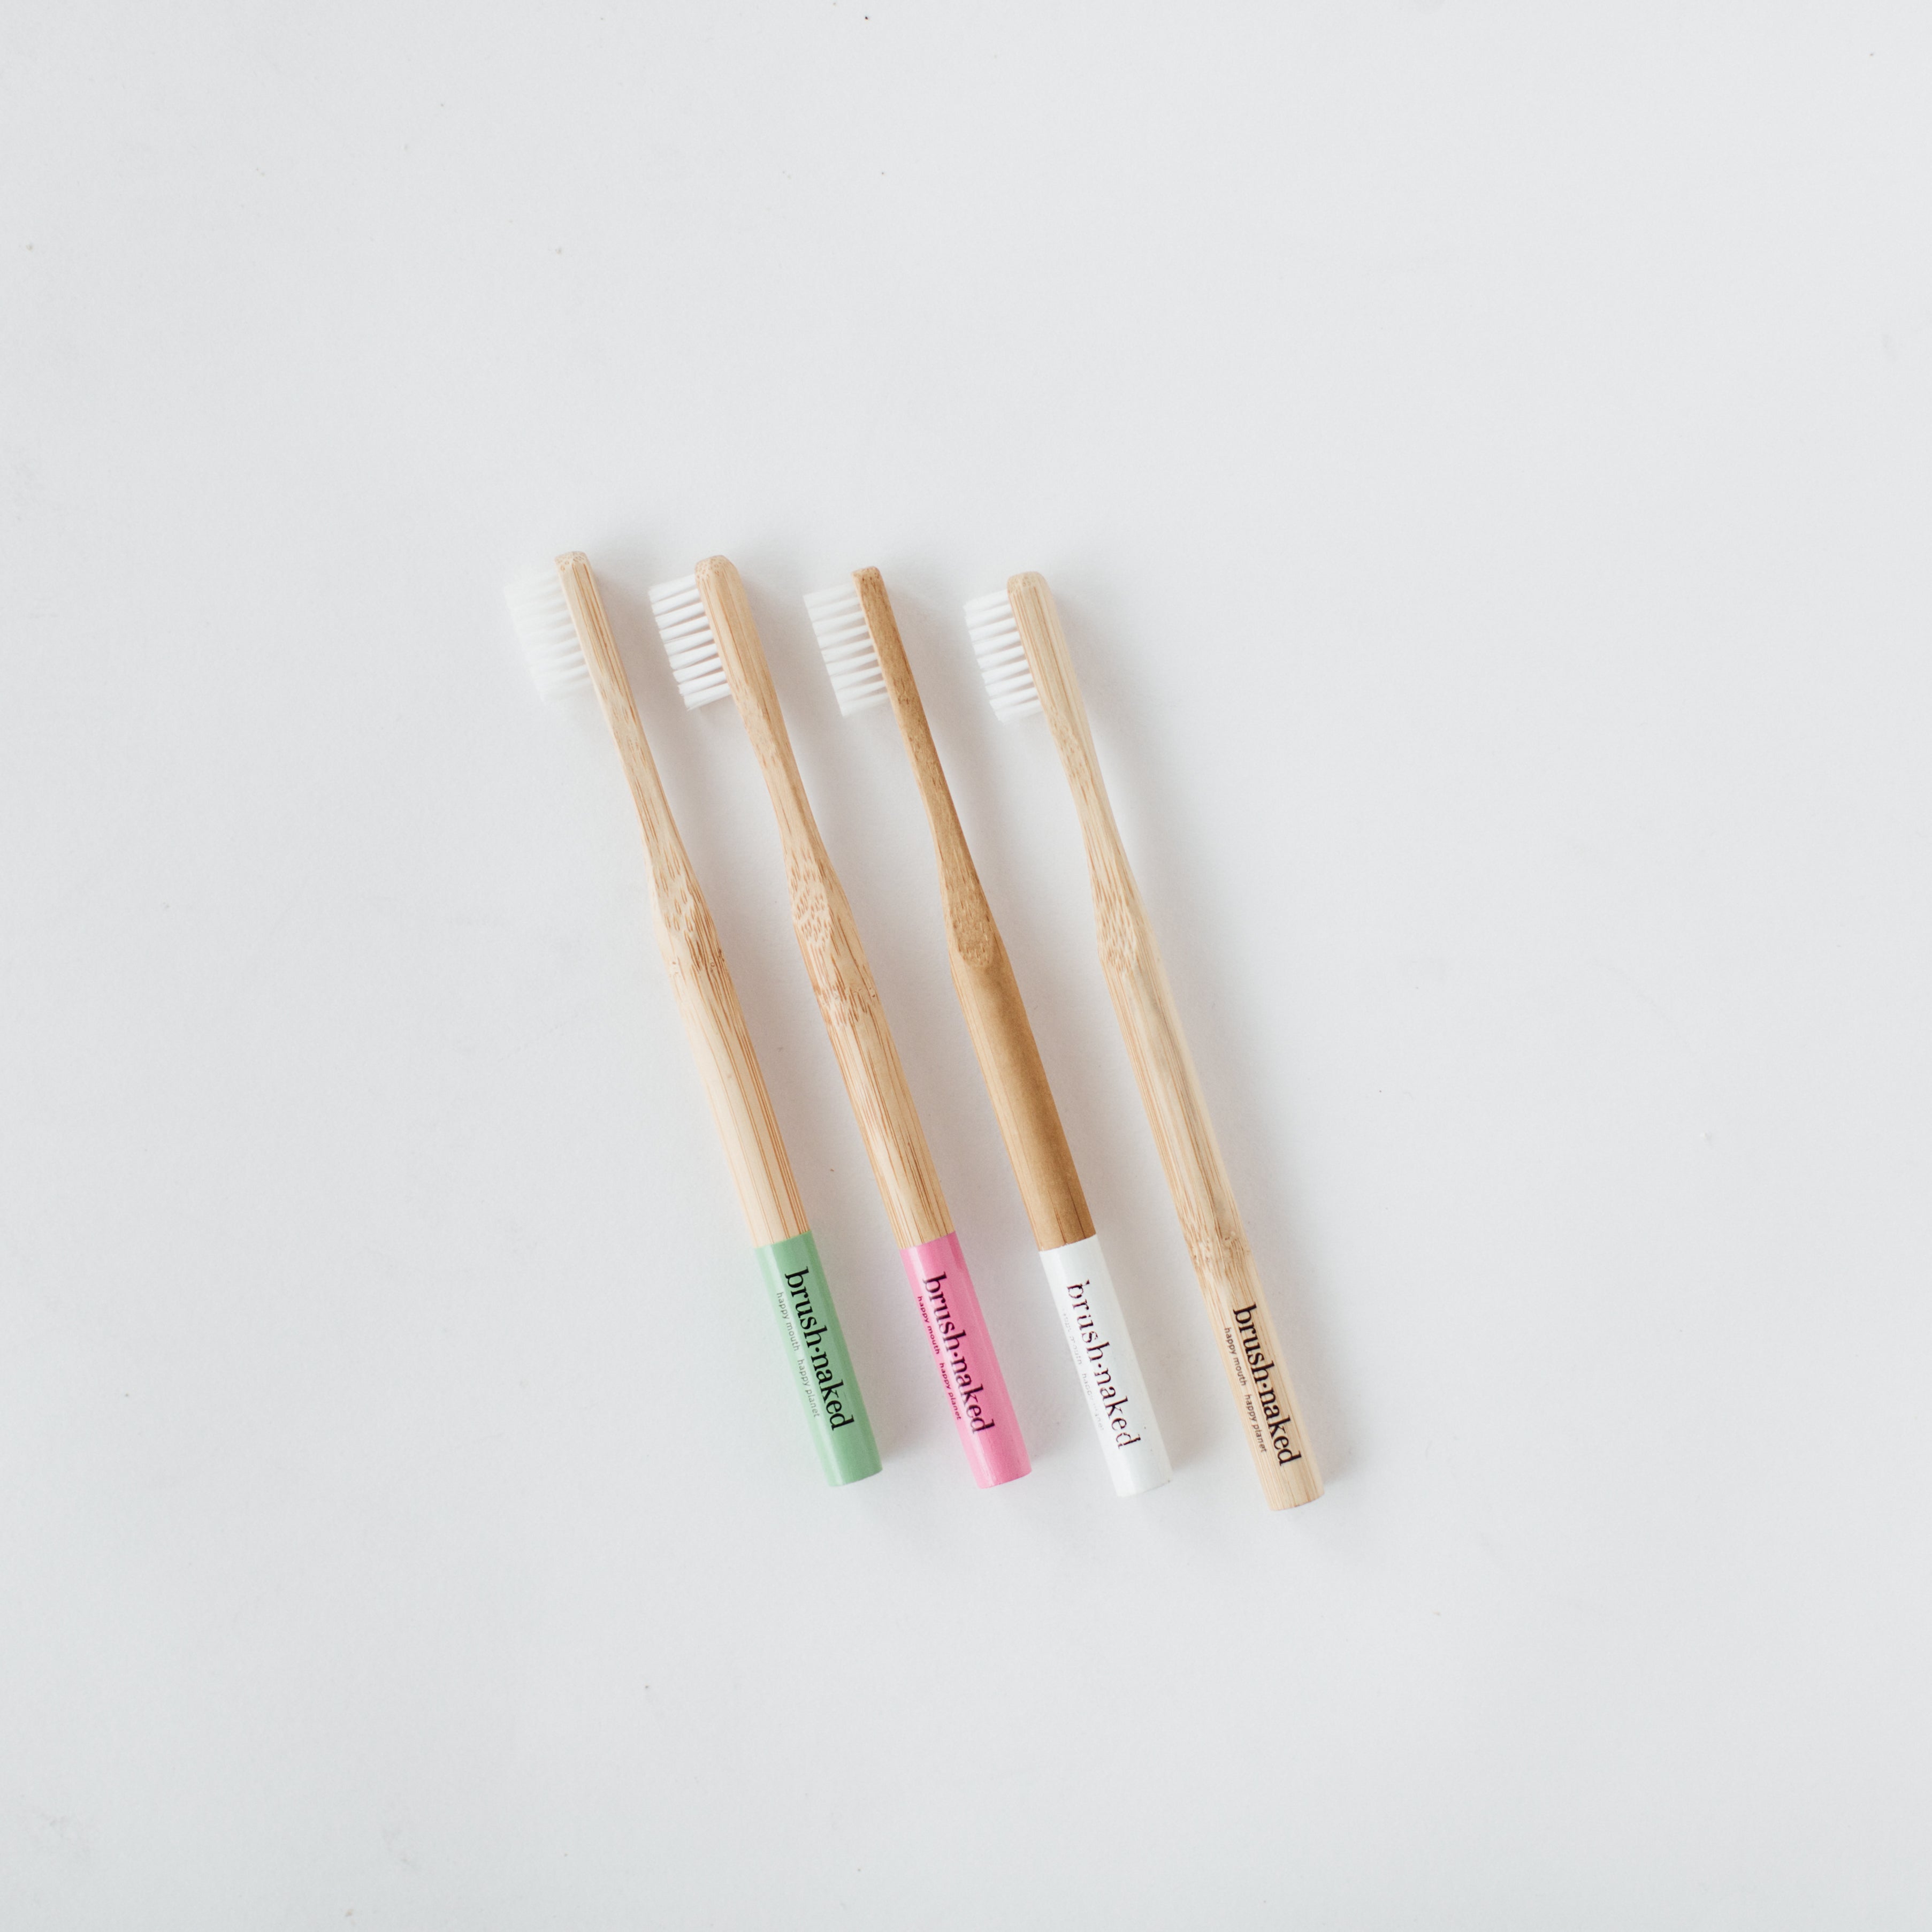 ADULT NYLON TOOTHBRUSHES - 4 PACK - WHOLESALE  - nelsonnaturals remineralizing toothpaste